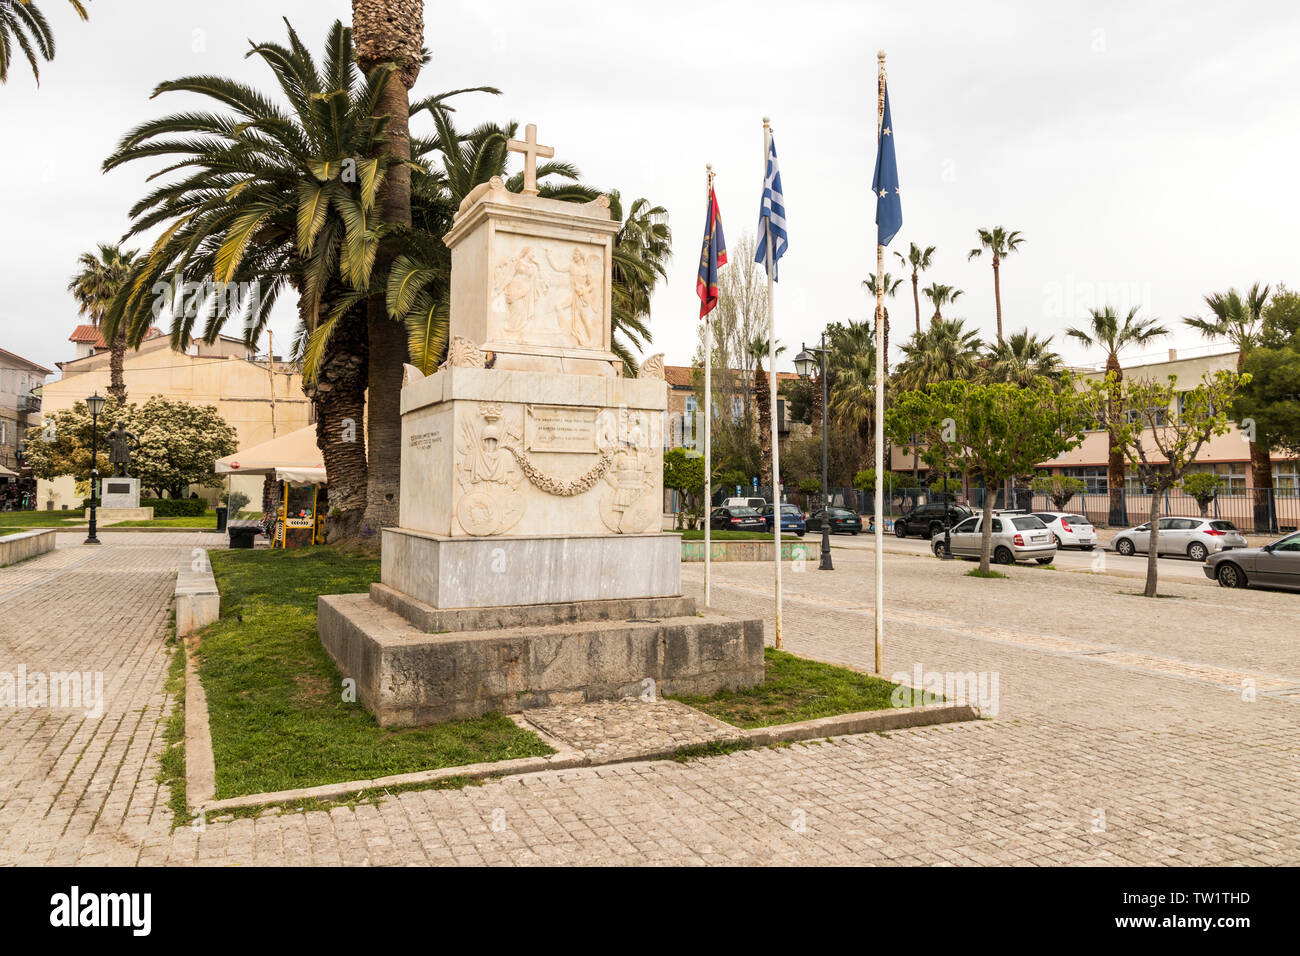 Nafplio, Greece. Funeral monument with the remains of Dimitrios Ypsilandis, one of the leaders of the Greek revolution, in Three Admirals' Square Stock Photo